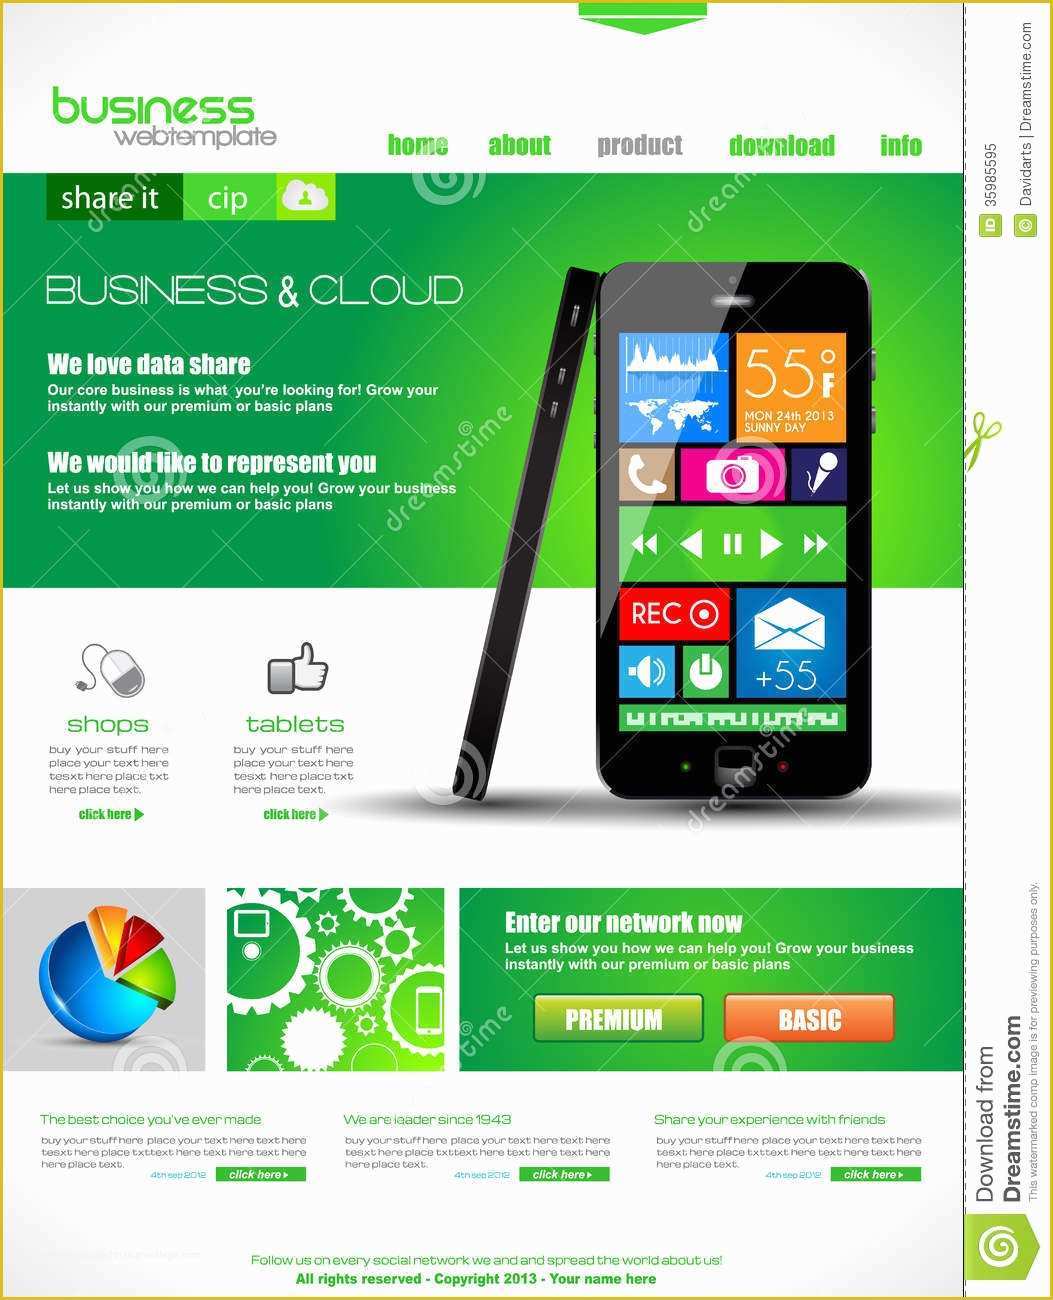 Copyright Free Website Templates Of Website Template for Corporate Business and Cloud Purposes